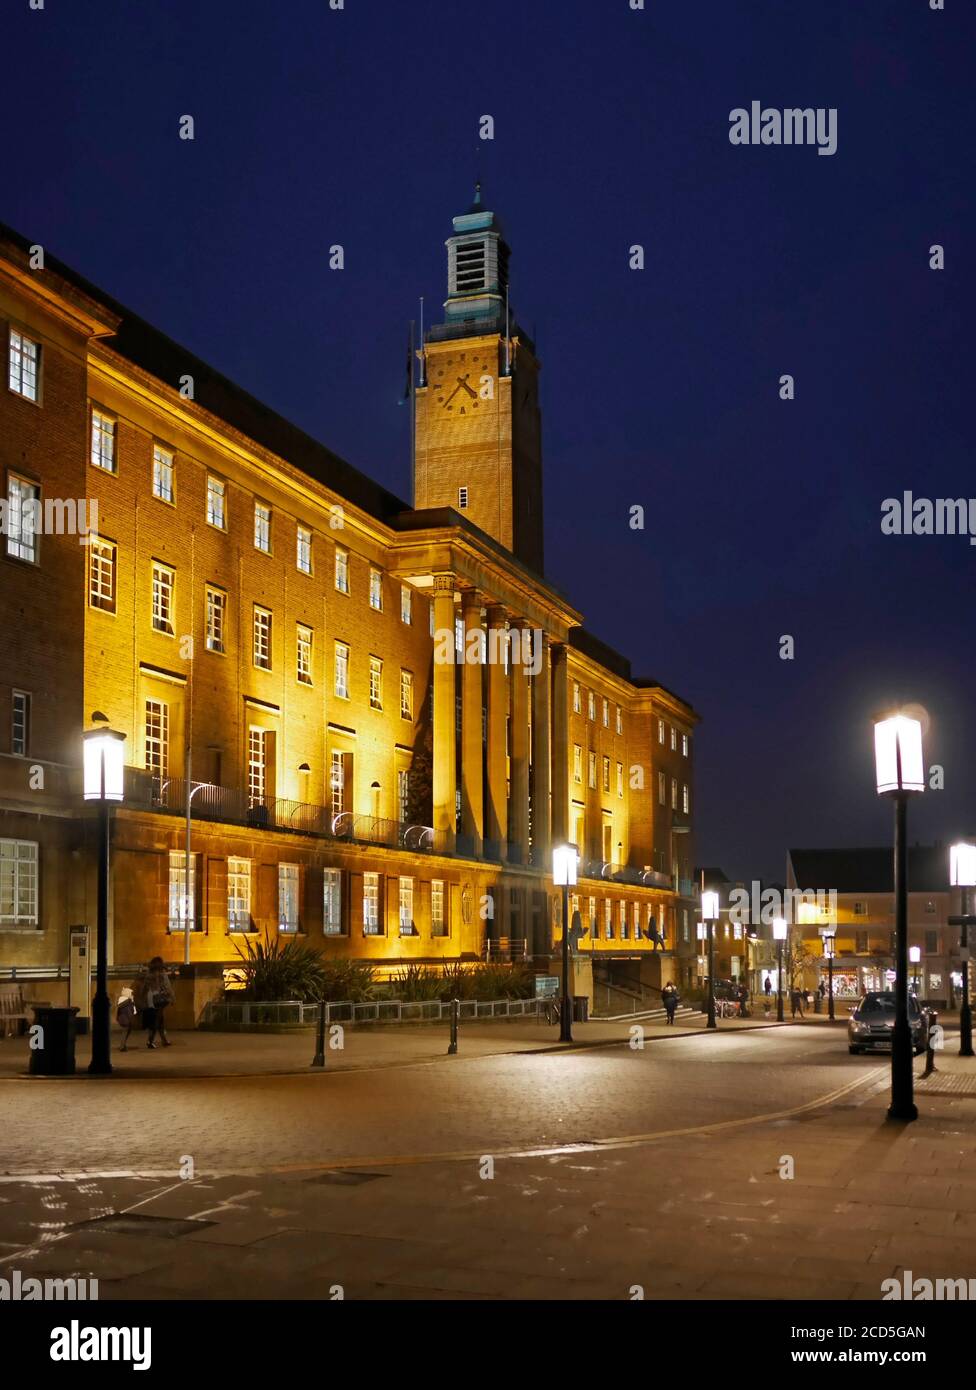 Norwich City Hall with its Clock Tower and lit outside lanterns, floodlit at night, Norwich, Norfolk, England, UK Stock Photo